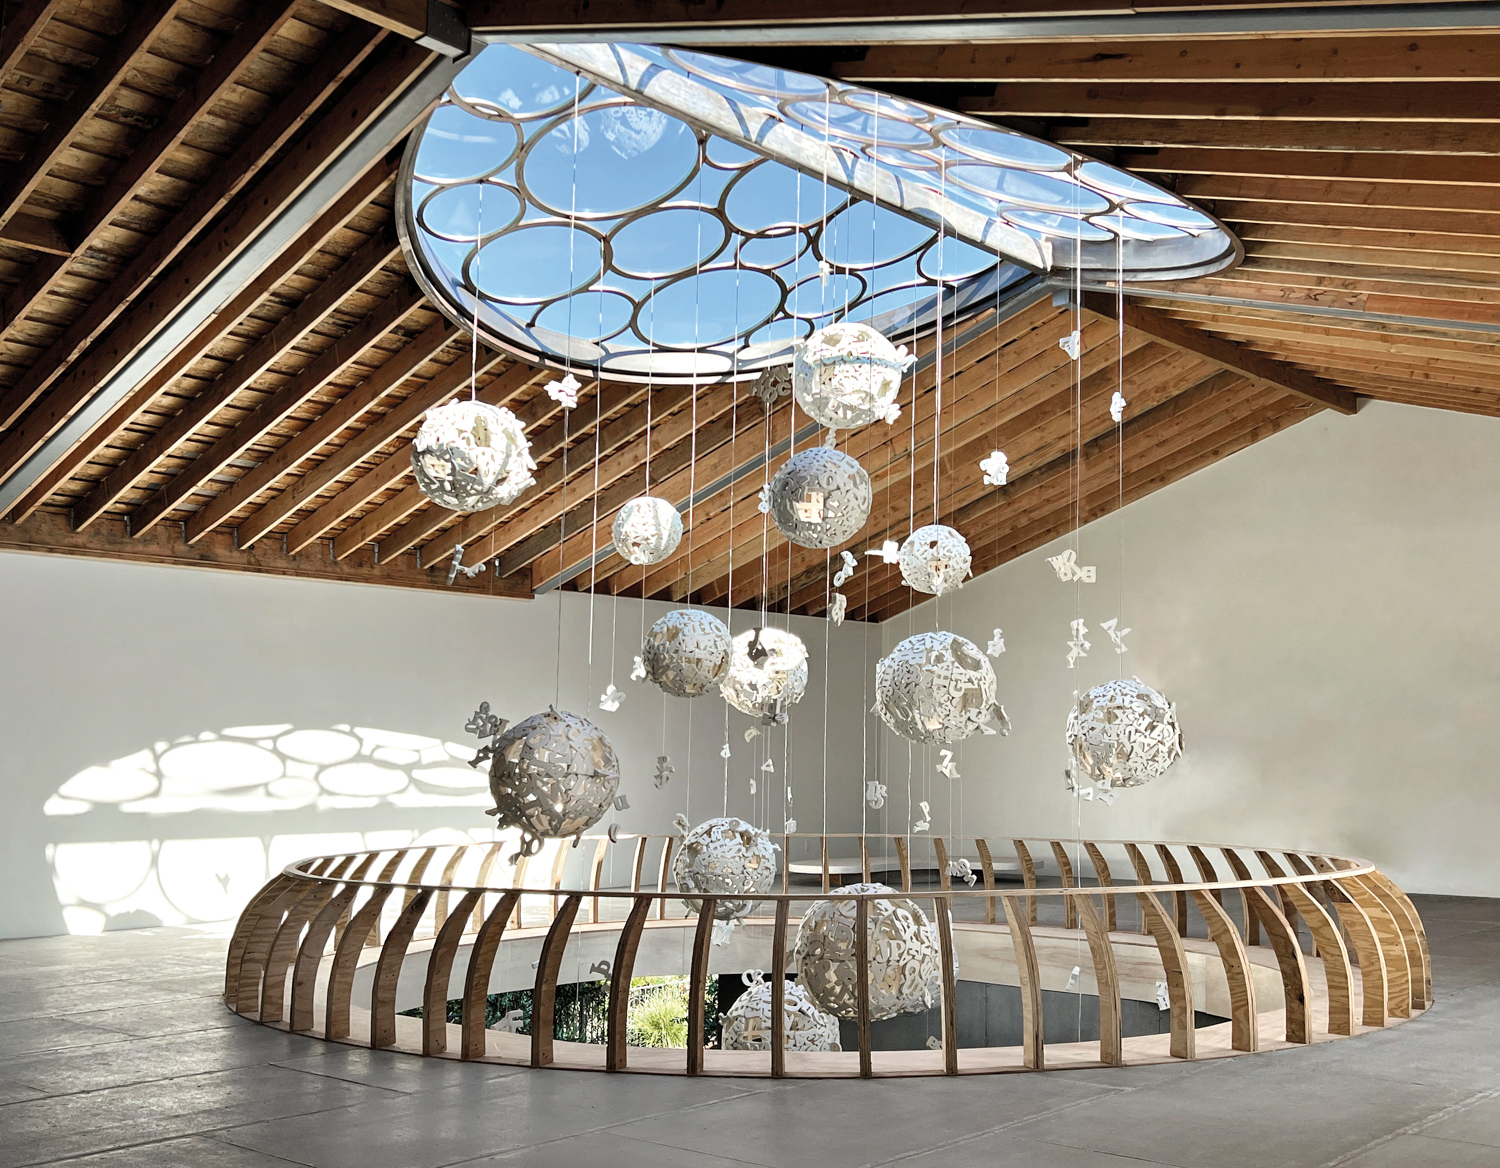 An art installation by Brigitte D’Annibale in which white spherical sculptures hang from an oculus in a barn-like building